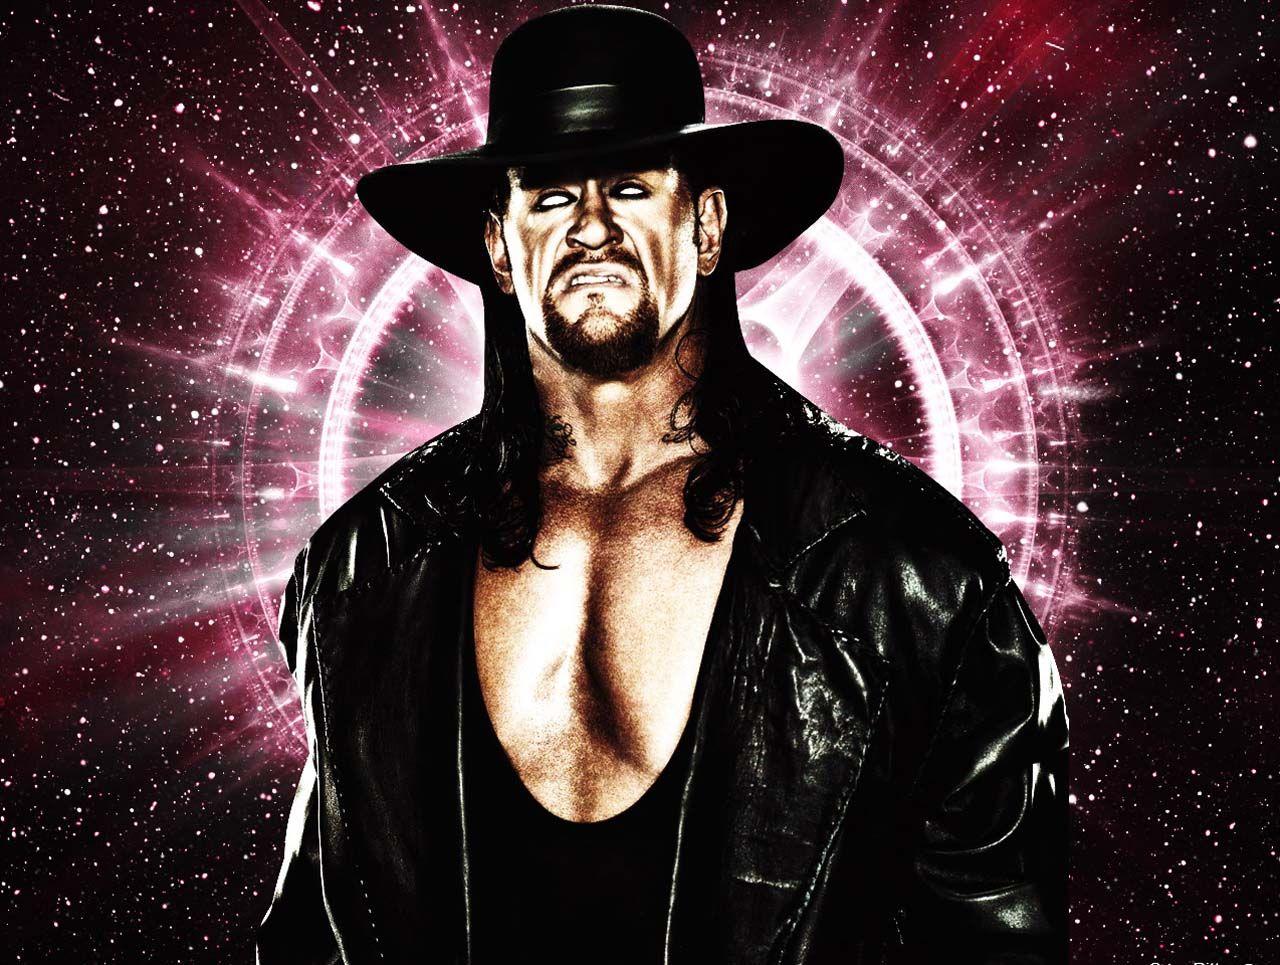 Of The Day: Undertaker